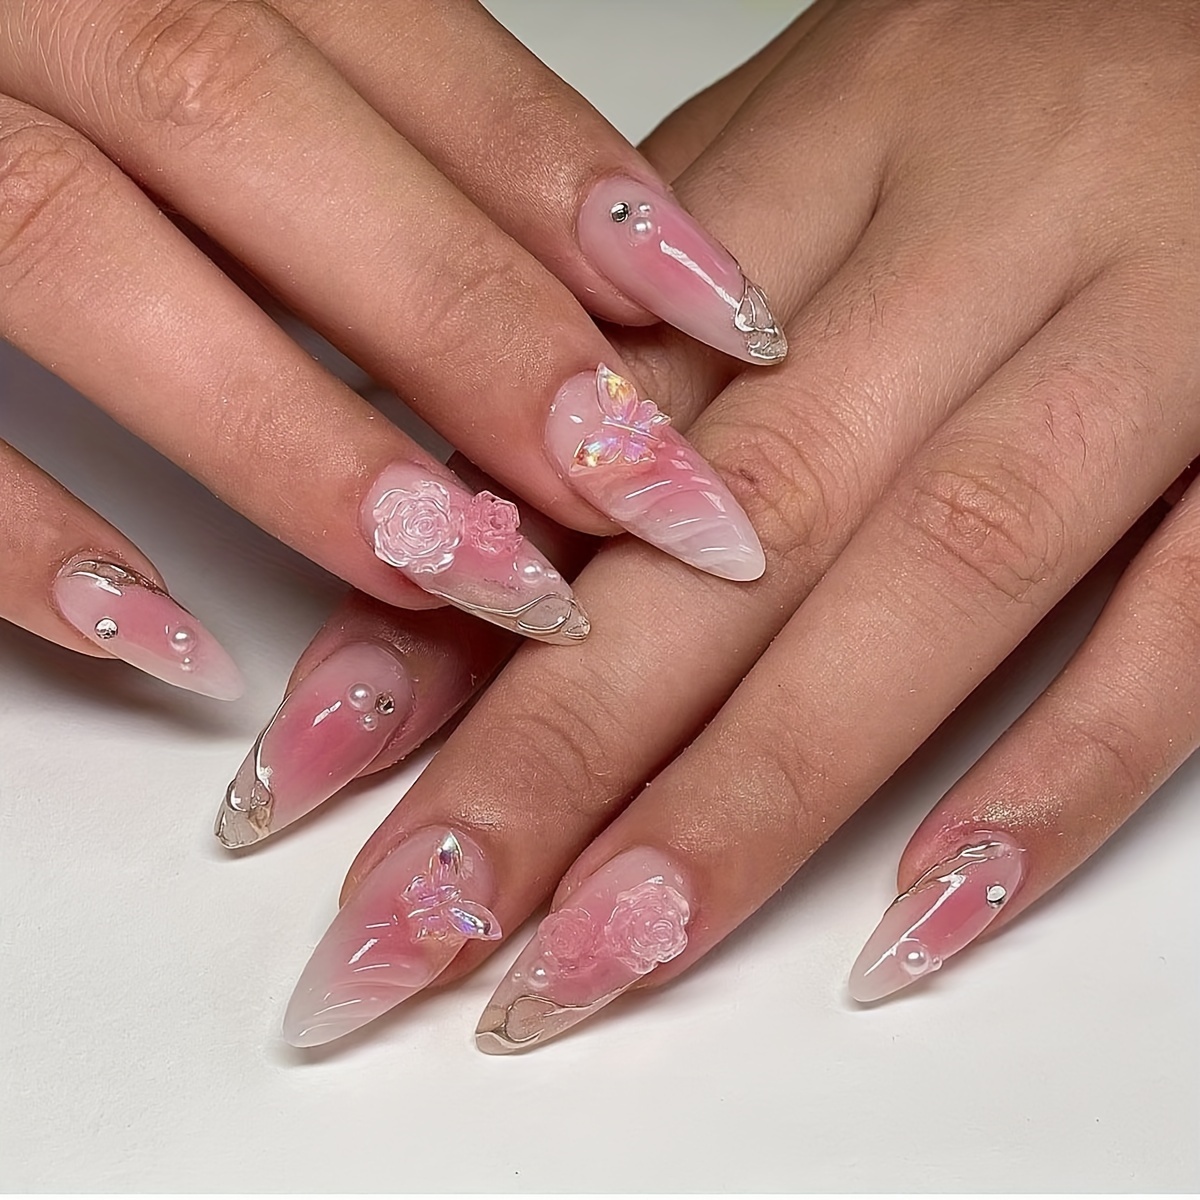 

dazzling" 24-piece Long Almond Press-on Nails Set - Handcrafted With Gold Glitter, 3d Water Ripple Design, Pink Blush & Camellia Accents, Aurora Rhinestone Butterfly False Nails Kit